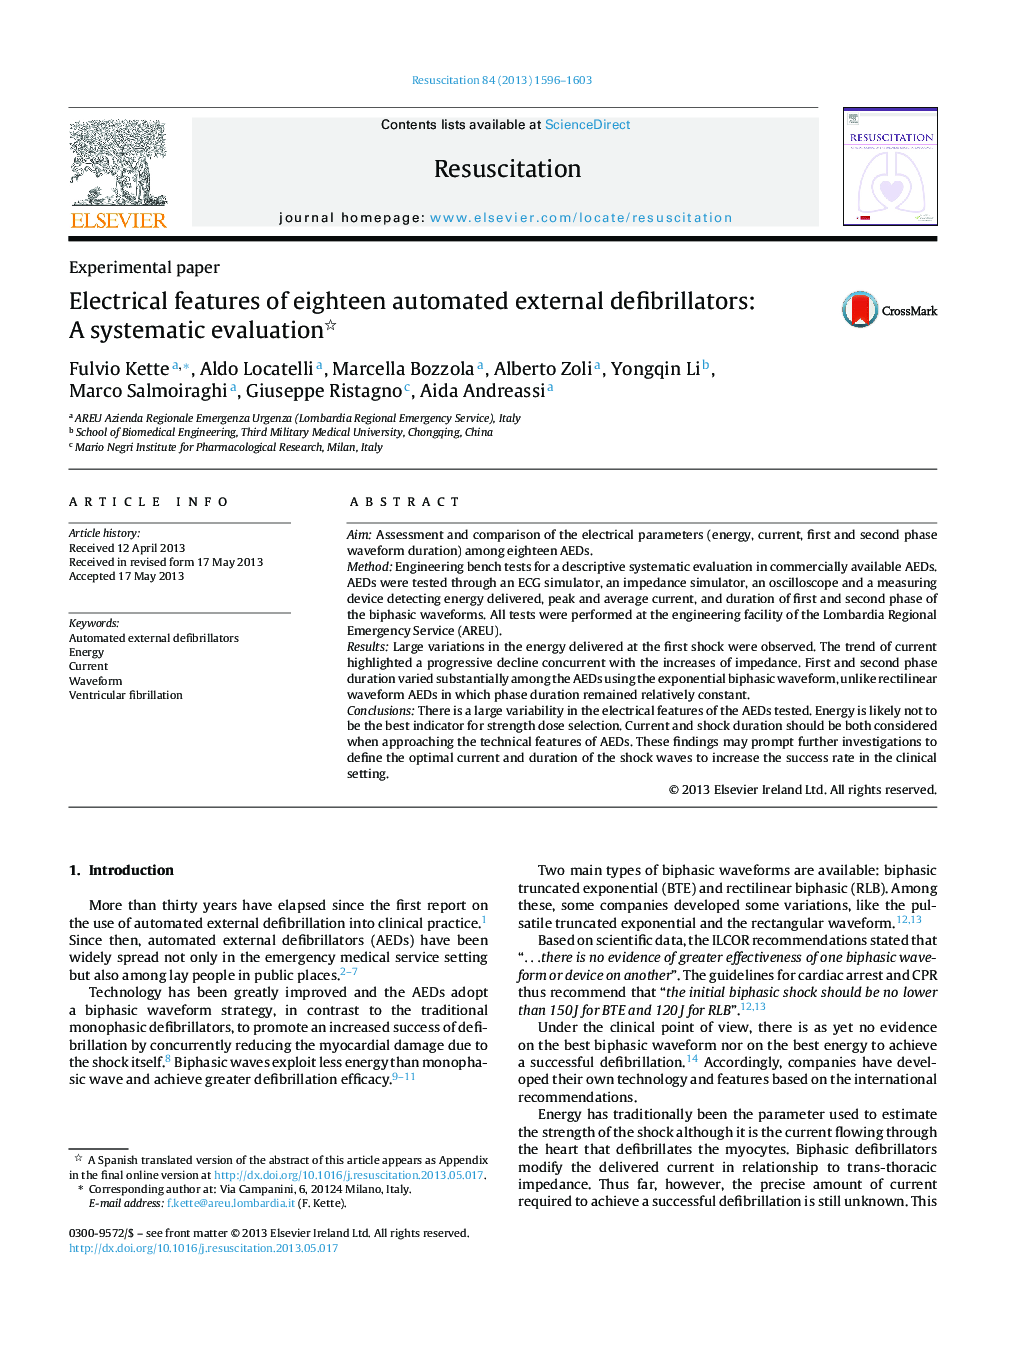 Electrical features of eighteen automated external defibrillators: A systematic evaluation